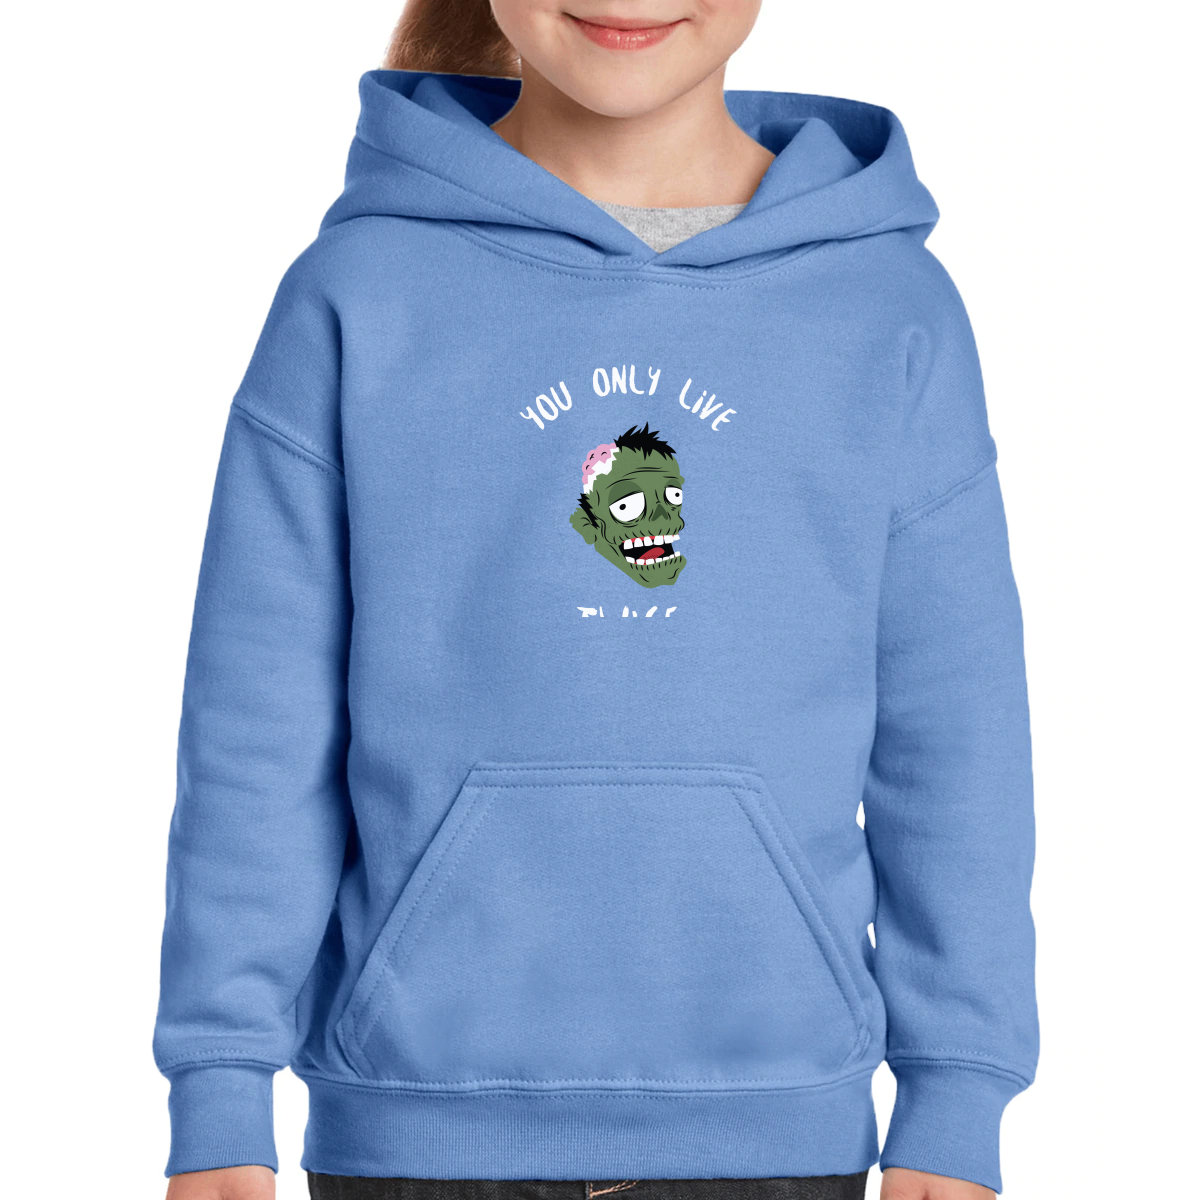 You Only Live Twice Kids Hoodie | Blue